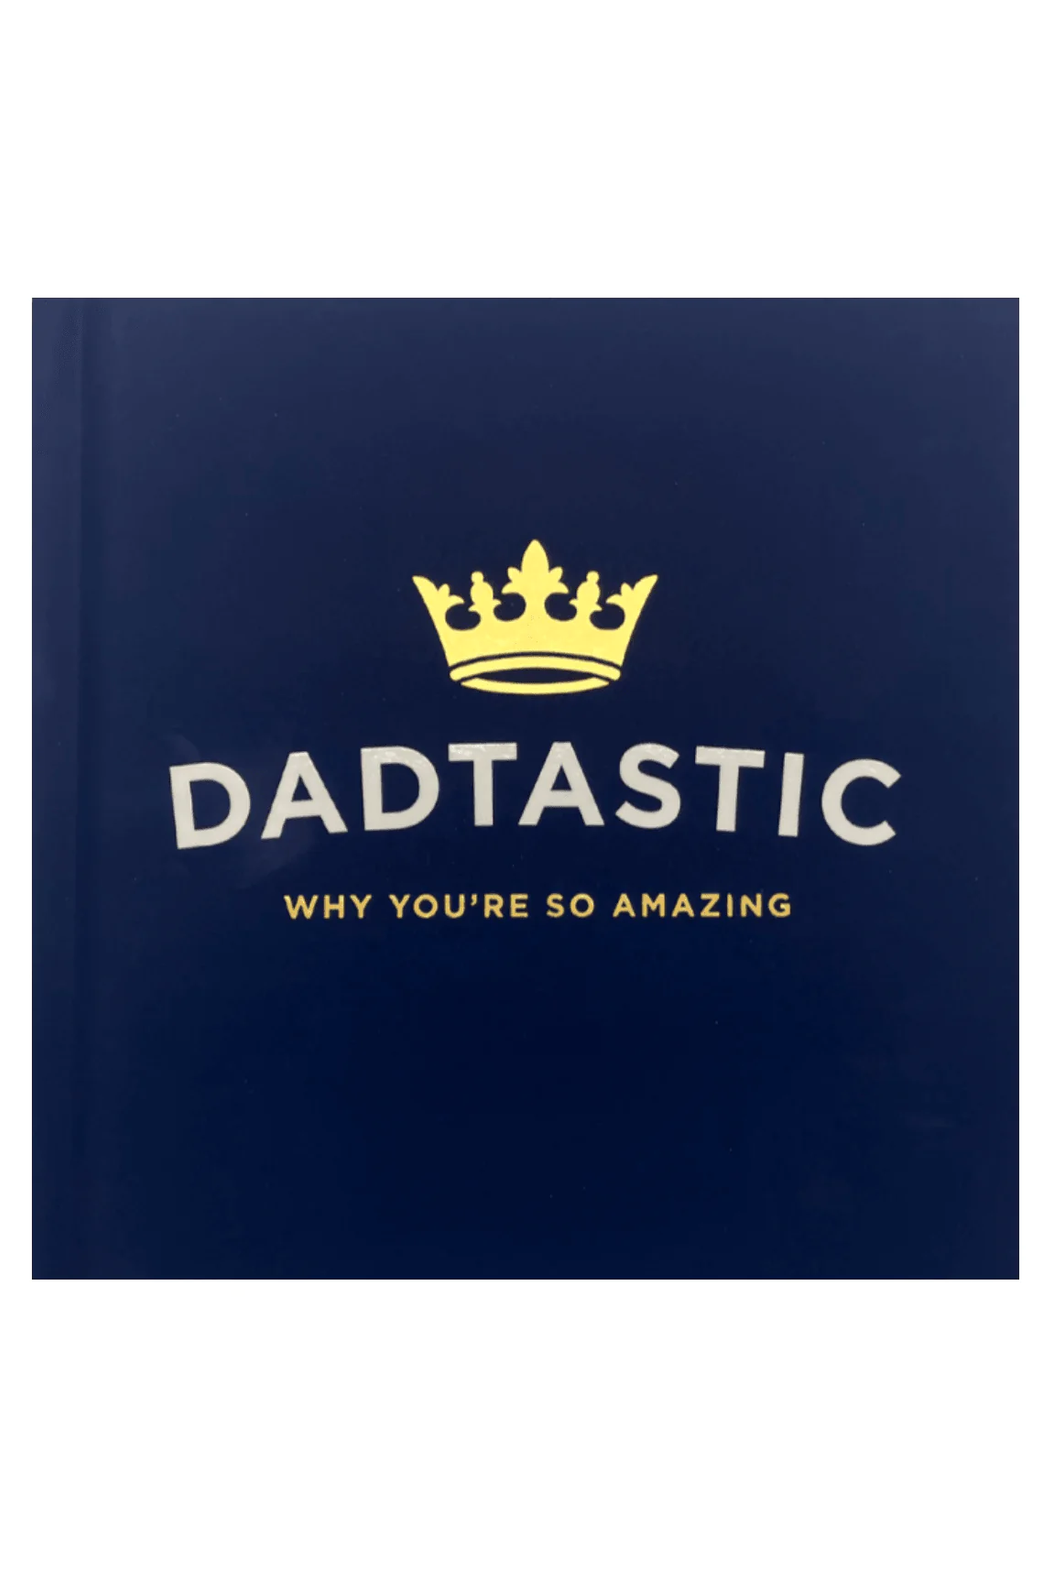 Dadtastic: Why You're So Amazing